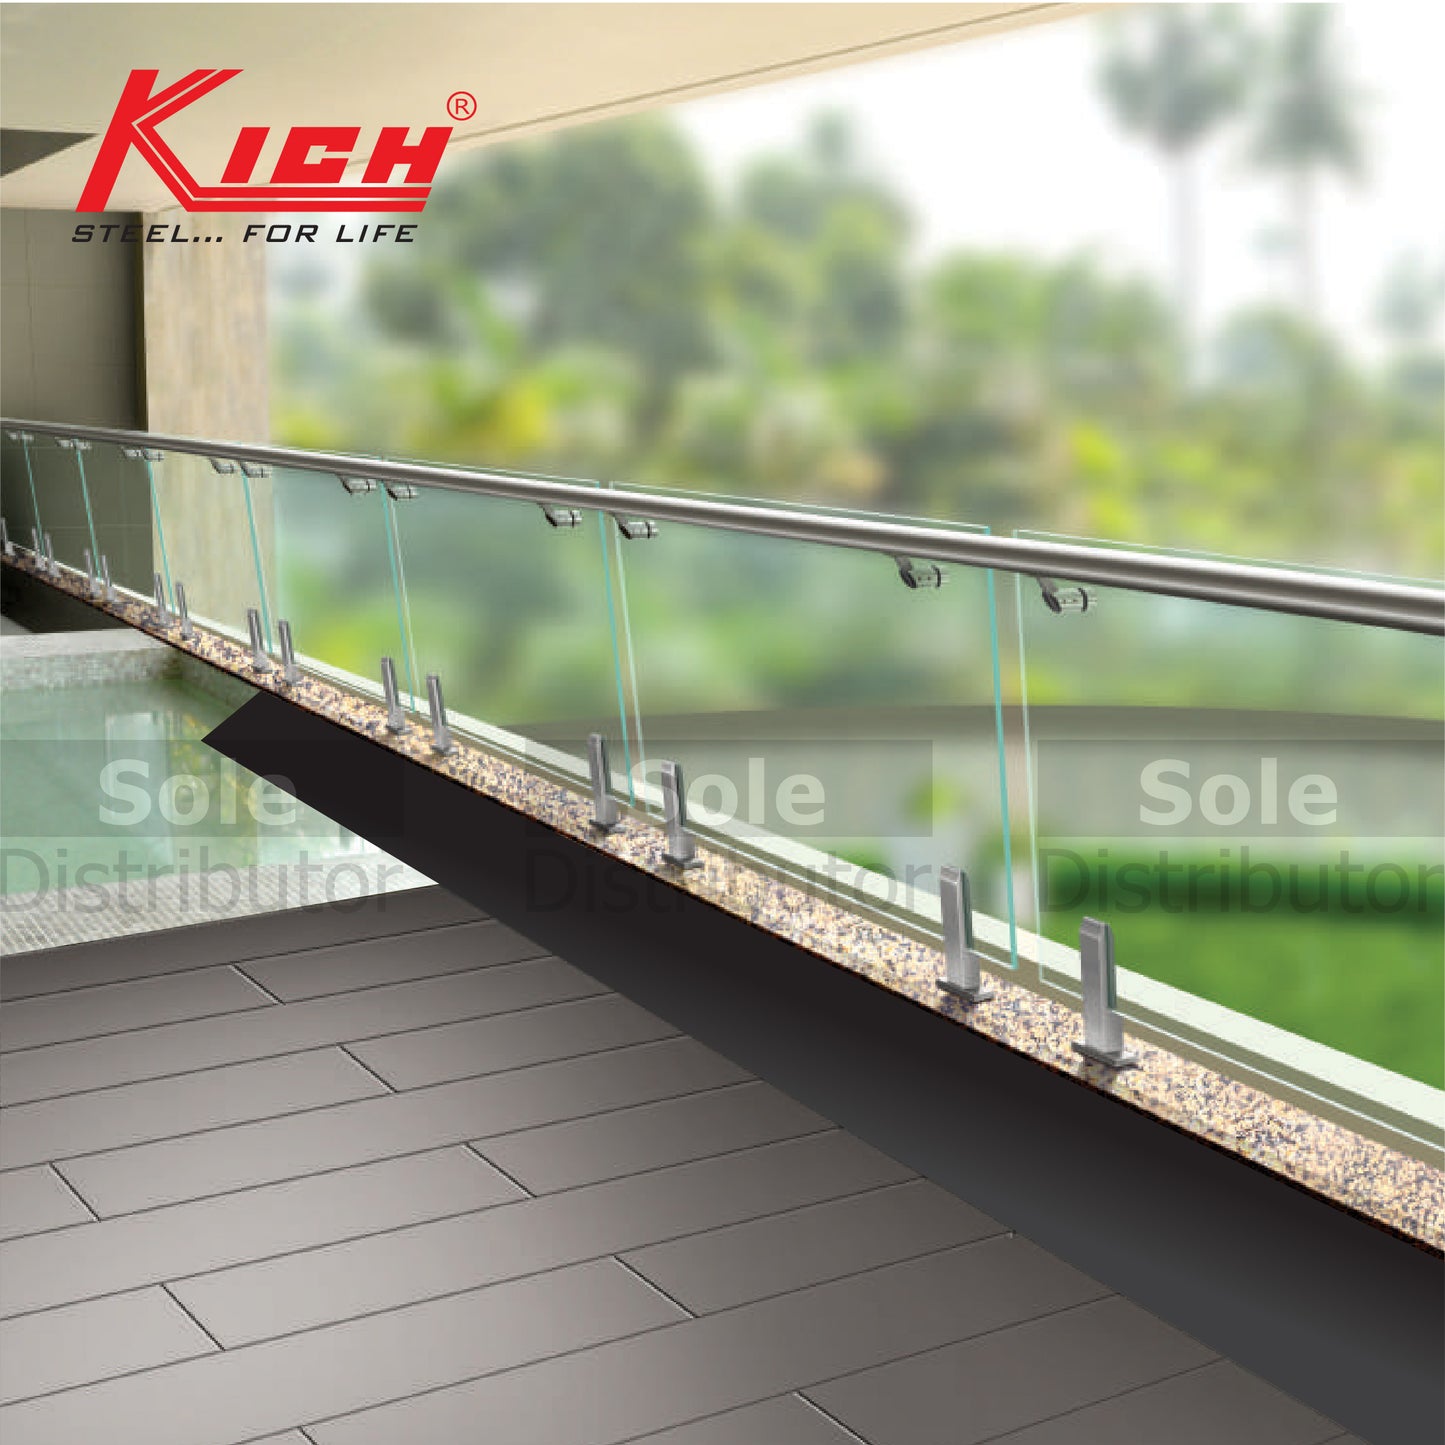 Kich Hand Rail Top Mounted Flat (Mini) Bracket System With Glass Stainless Steel 316 Grade - DT2-1-GLS